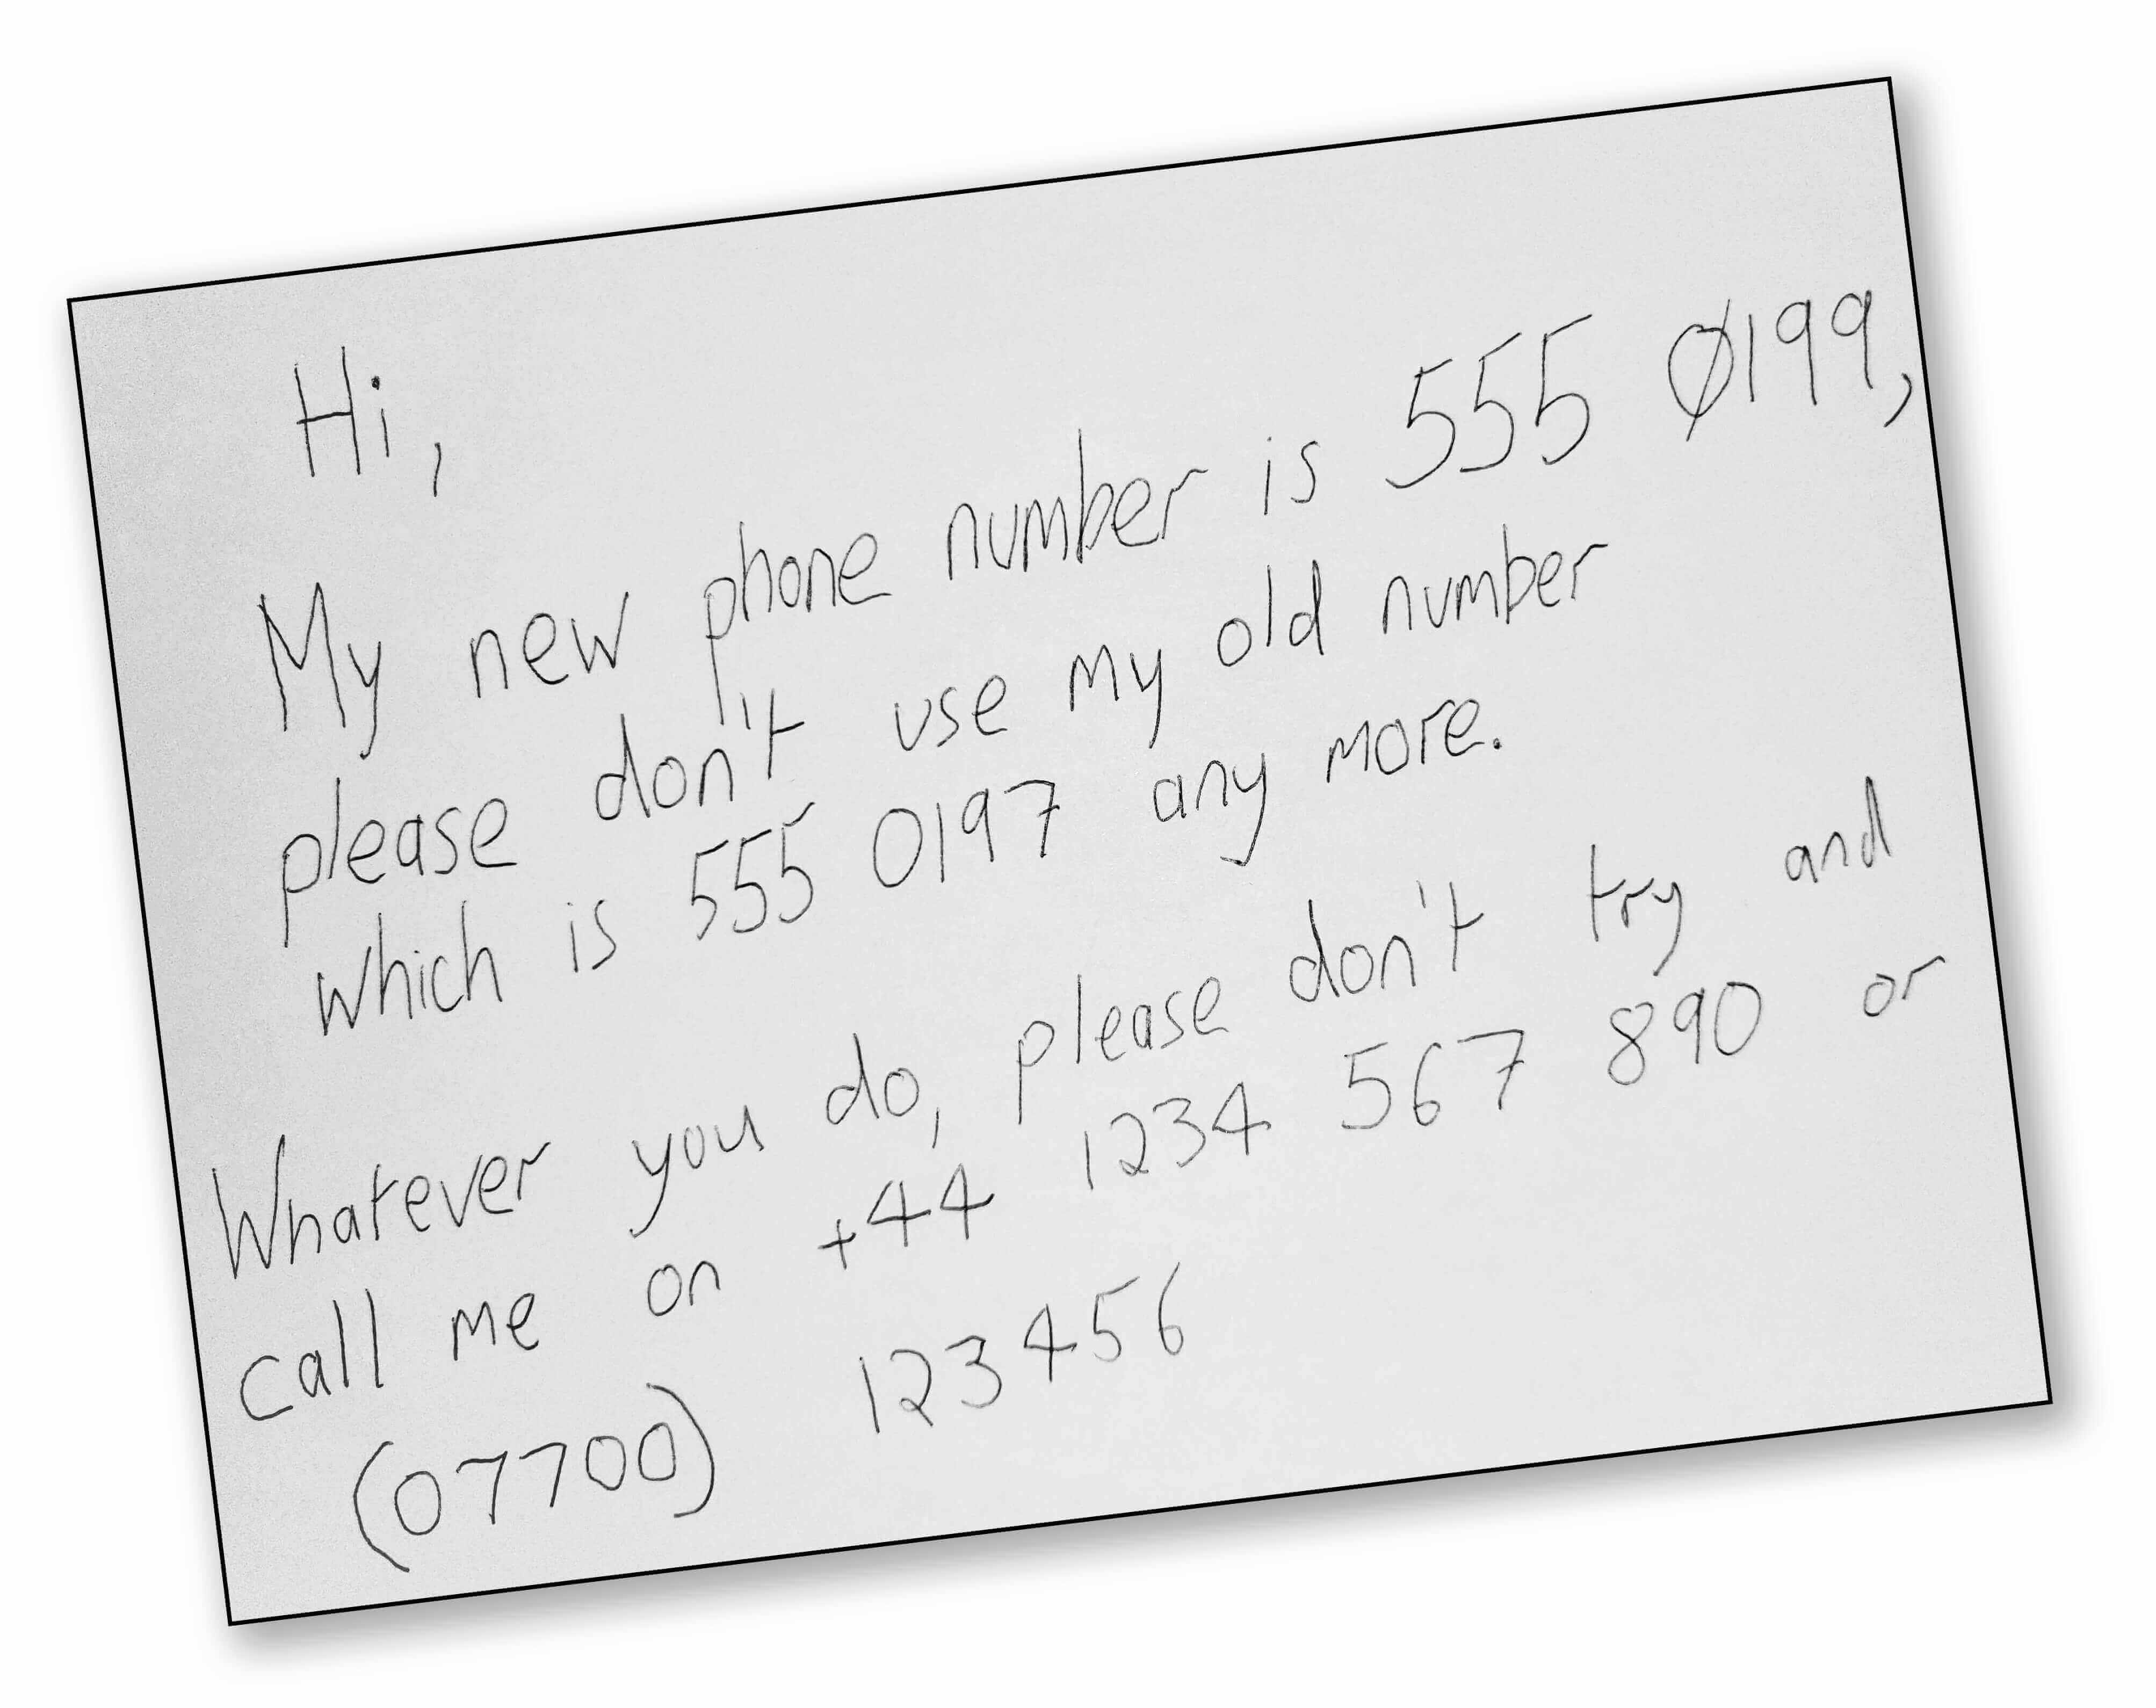 image showing handwritten phone number testing text